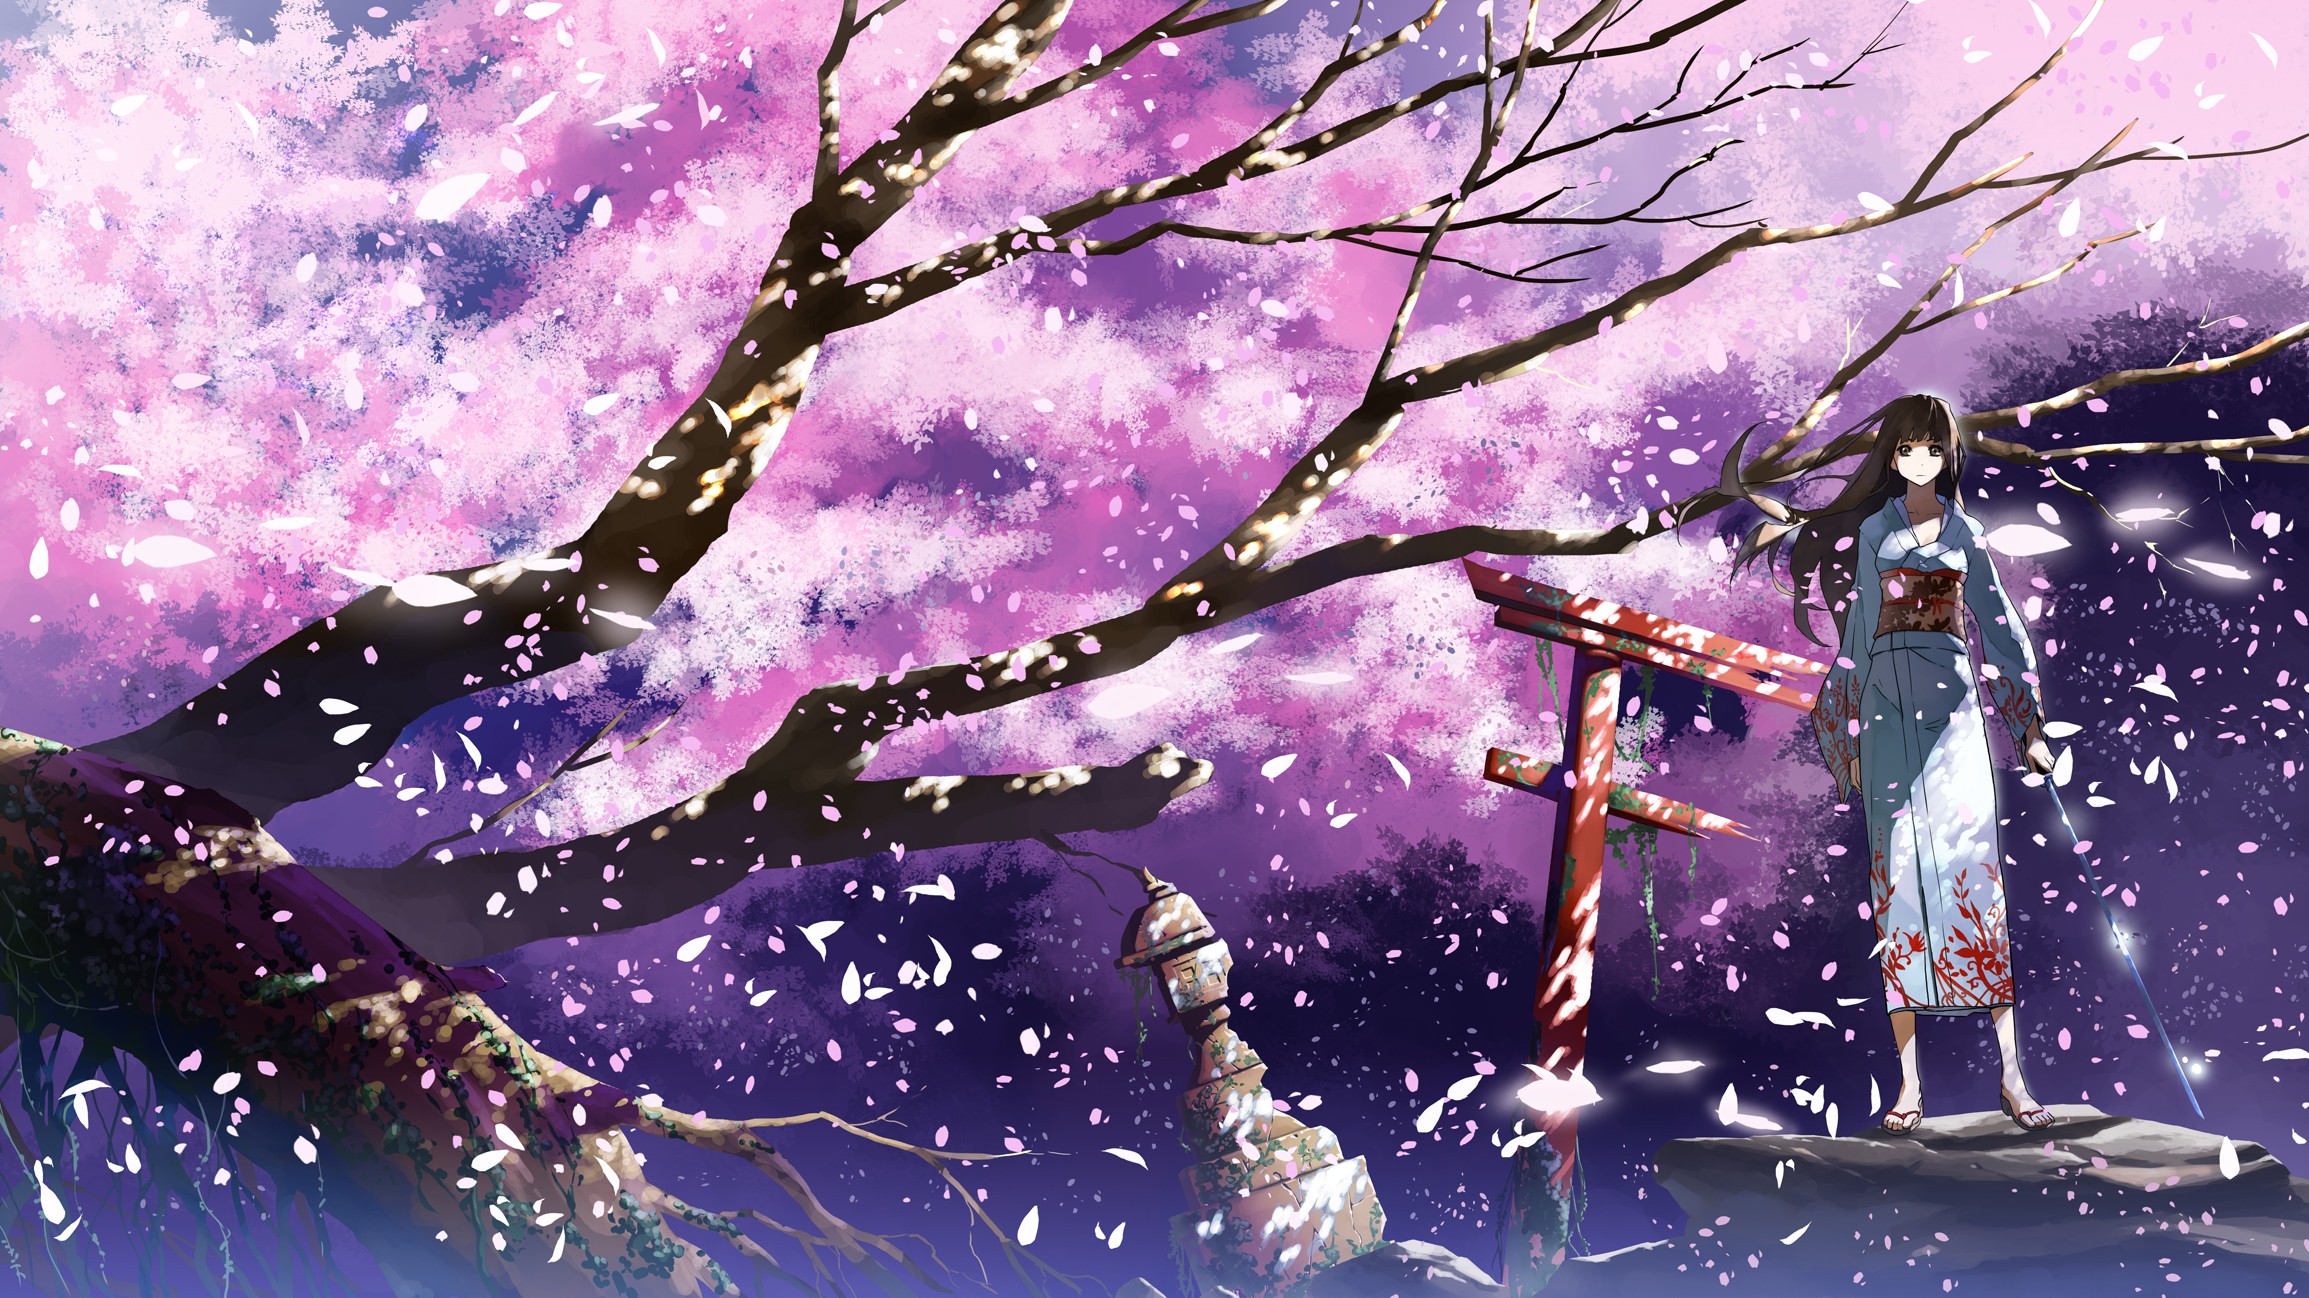 Anime 2309x1298 cherry blossom spring anime girls original characters Japanese clothes anime women with swords weapon sword trees women outdoors standing fantasy art fantasy girl brunette long hair